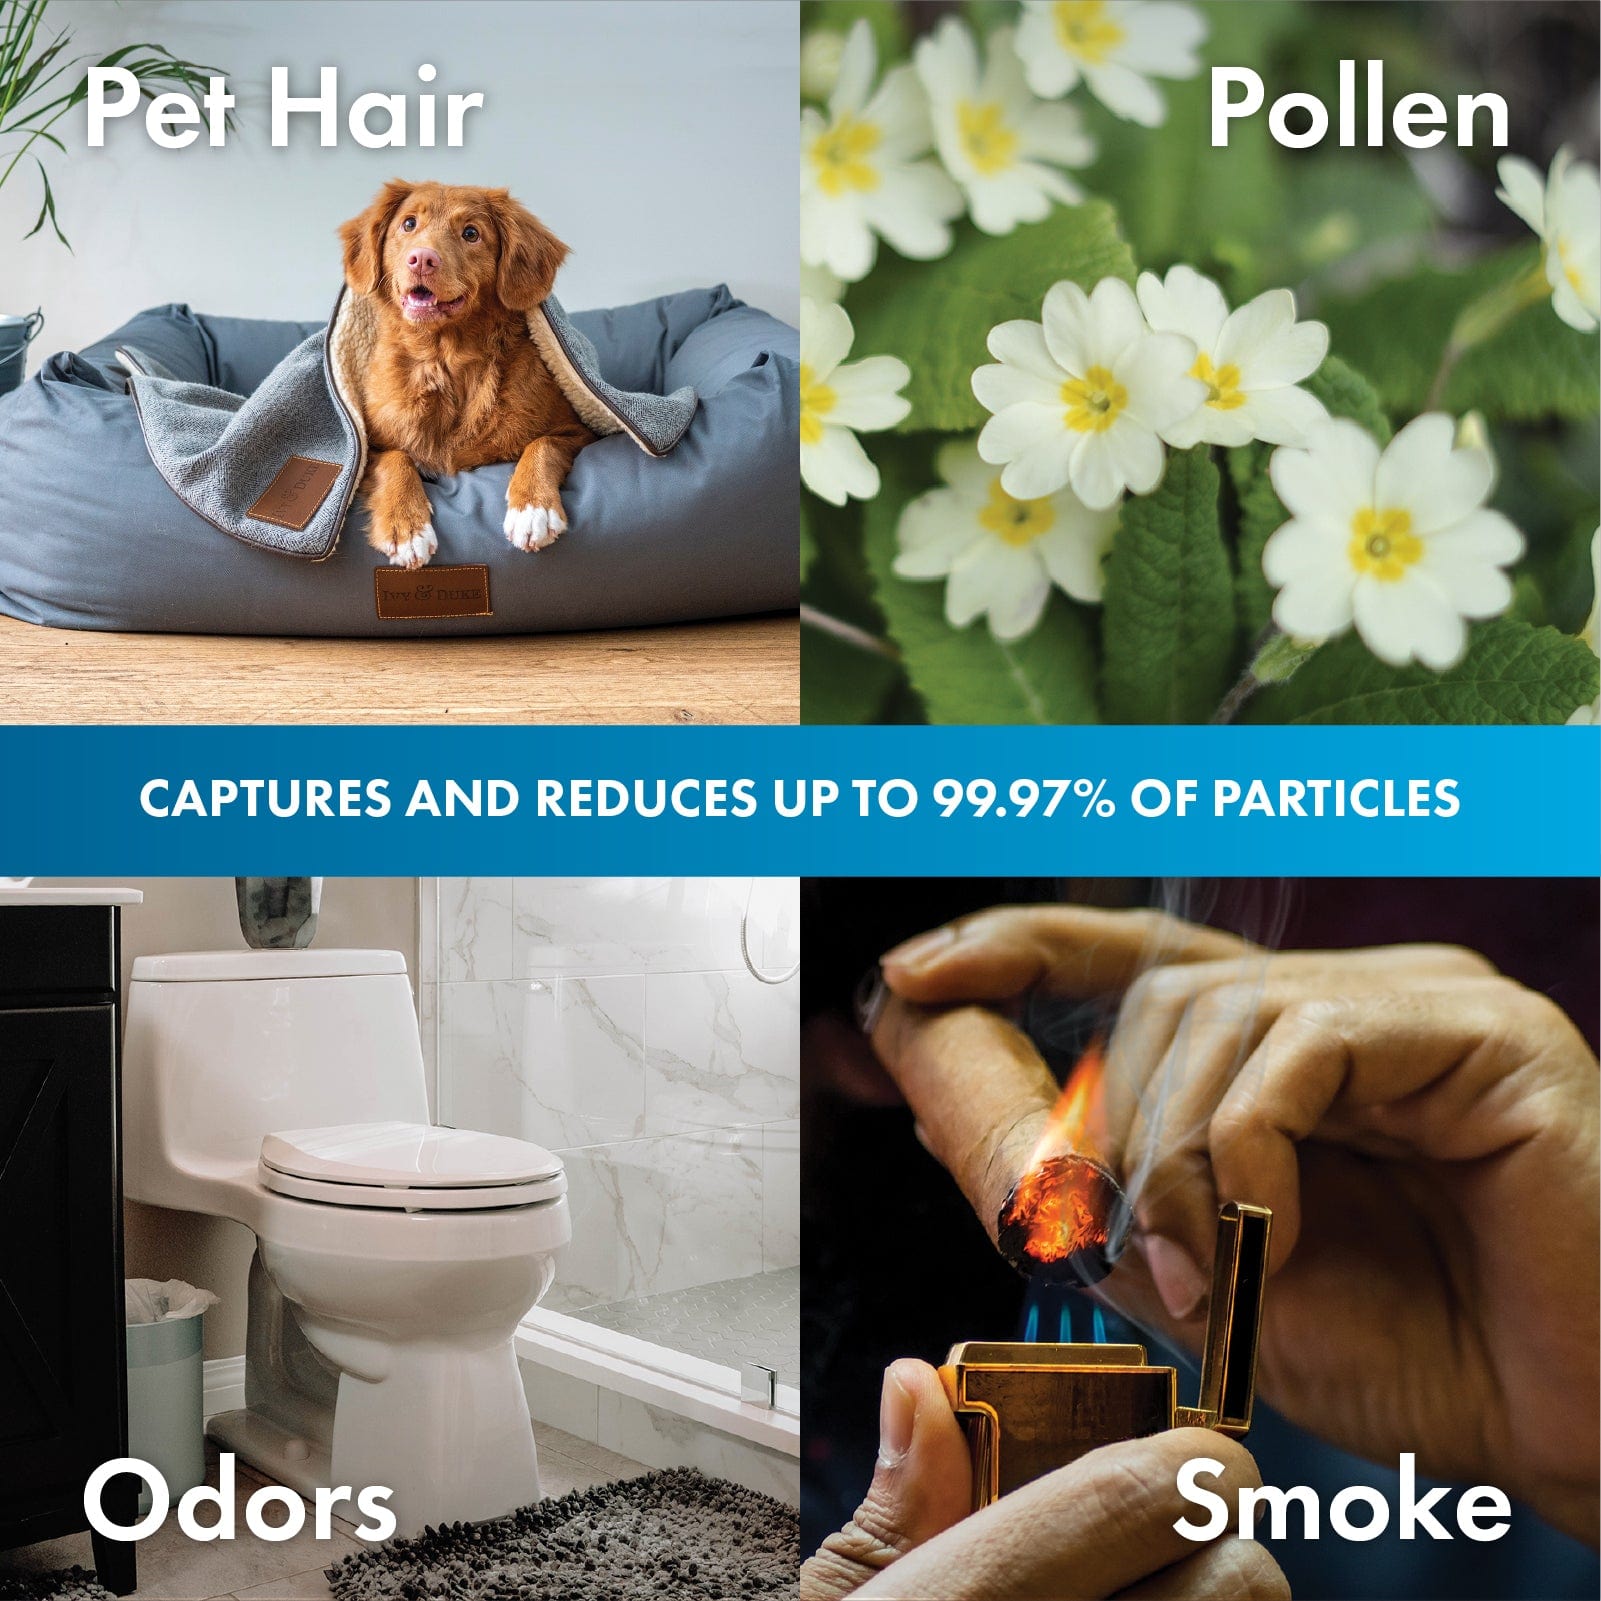 Captures and reduces up to 99.97% of particles. Pet Hair, Pollen, Odors, and Smoke